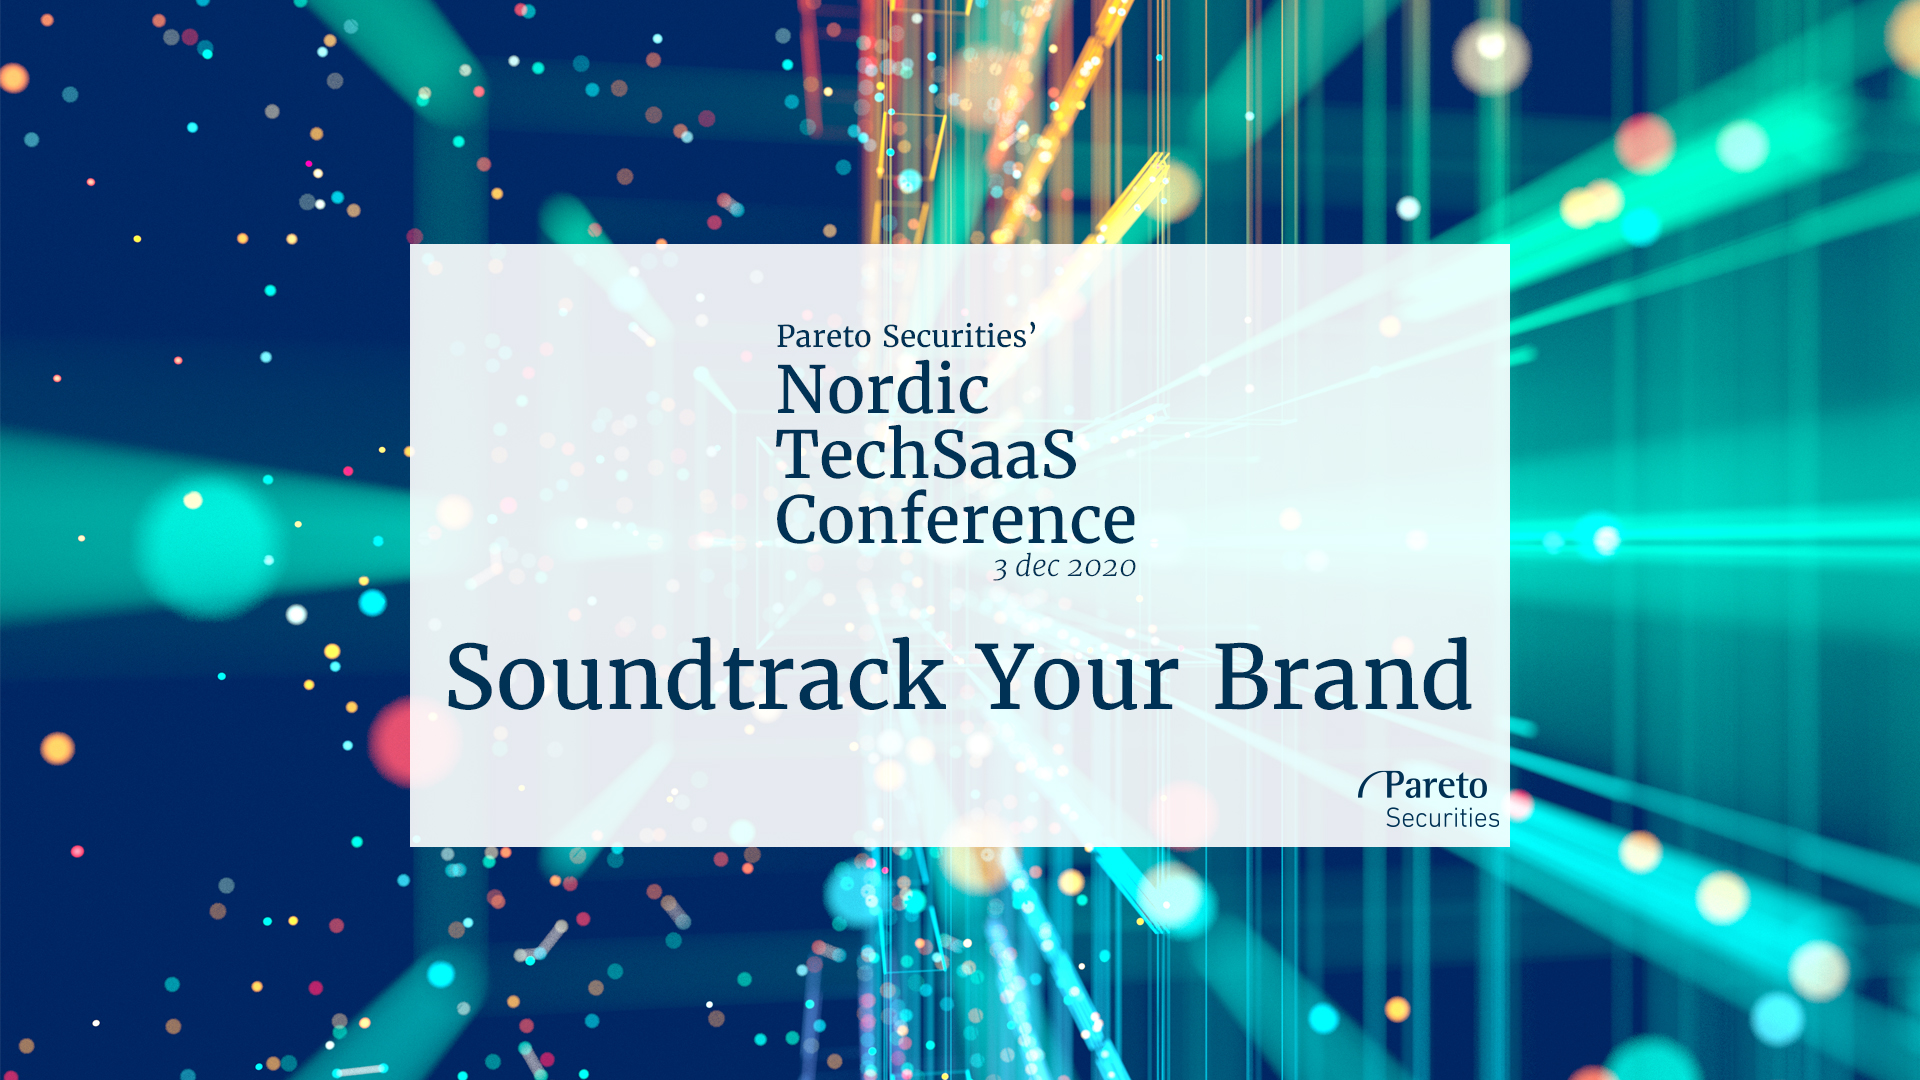 Soundtrack Your Brand / Pareto Securities’ virtual Nordic TechSaaS Conference